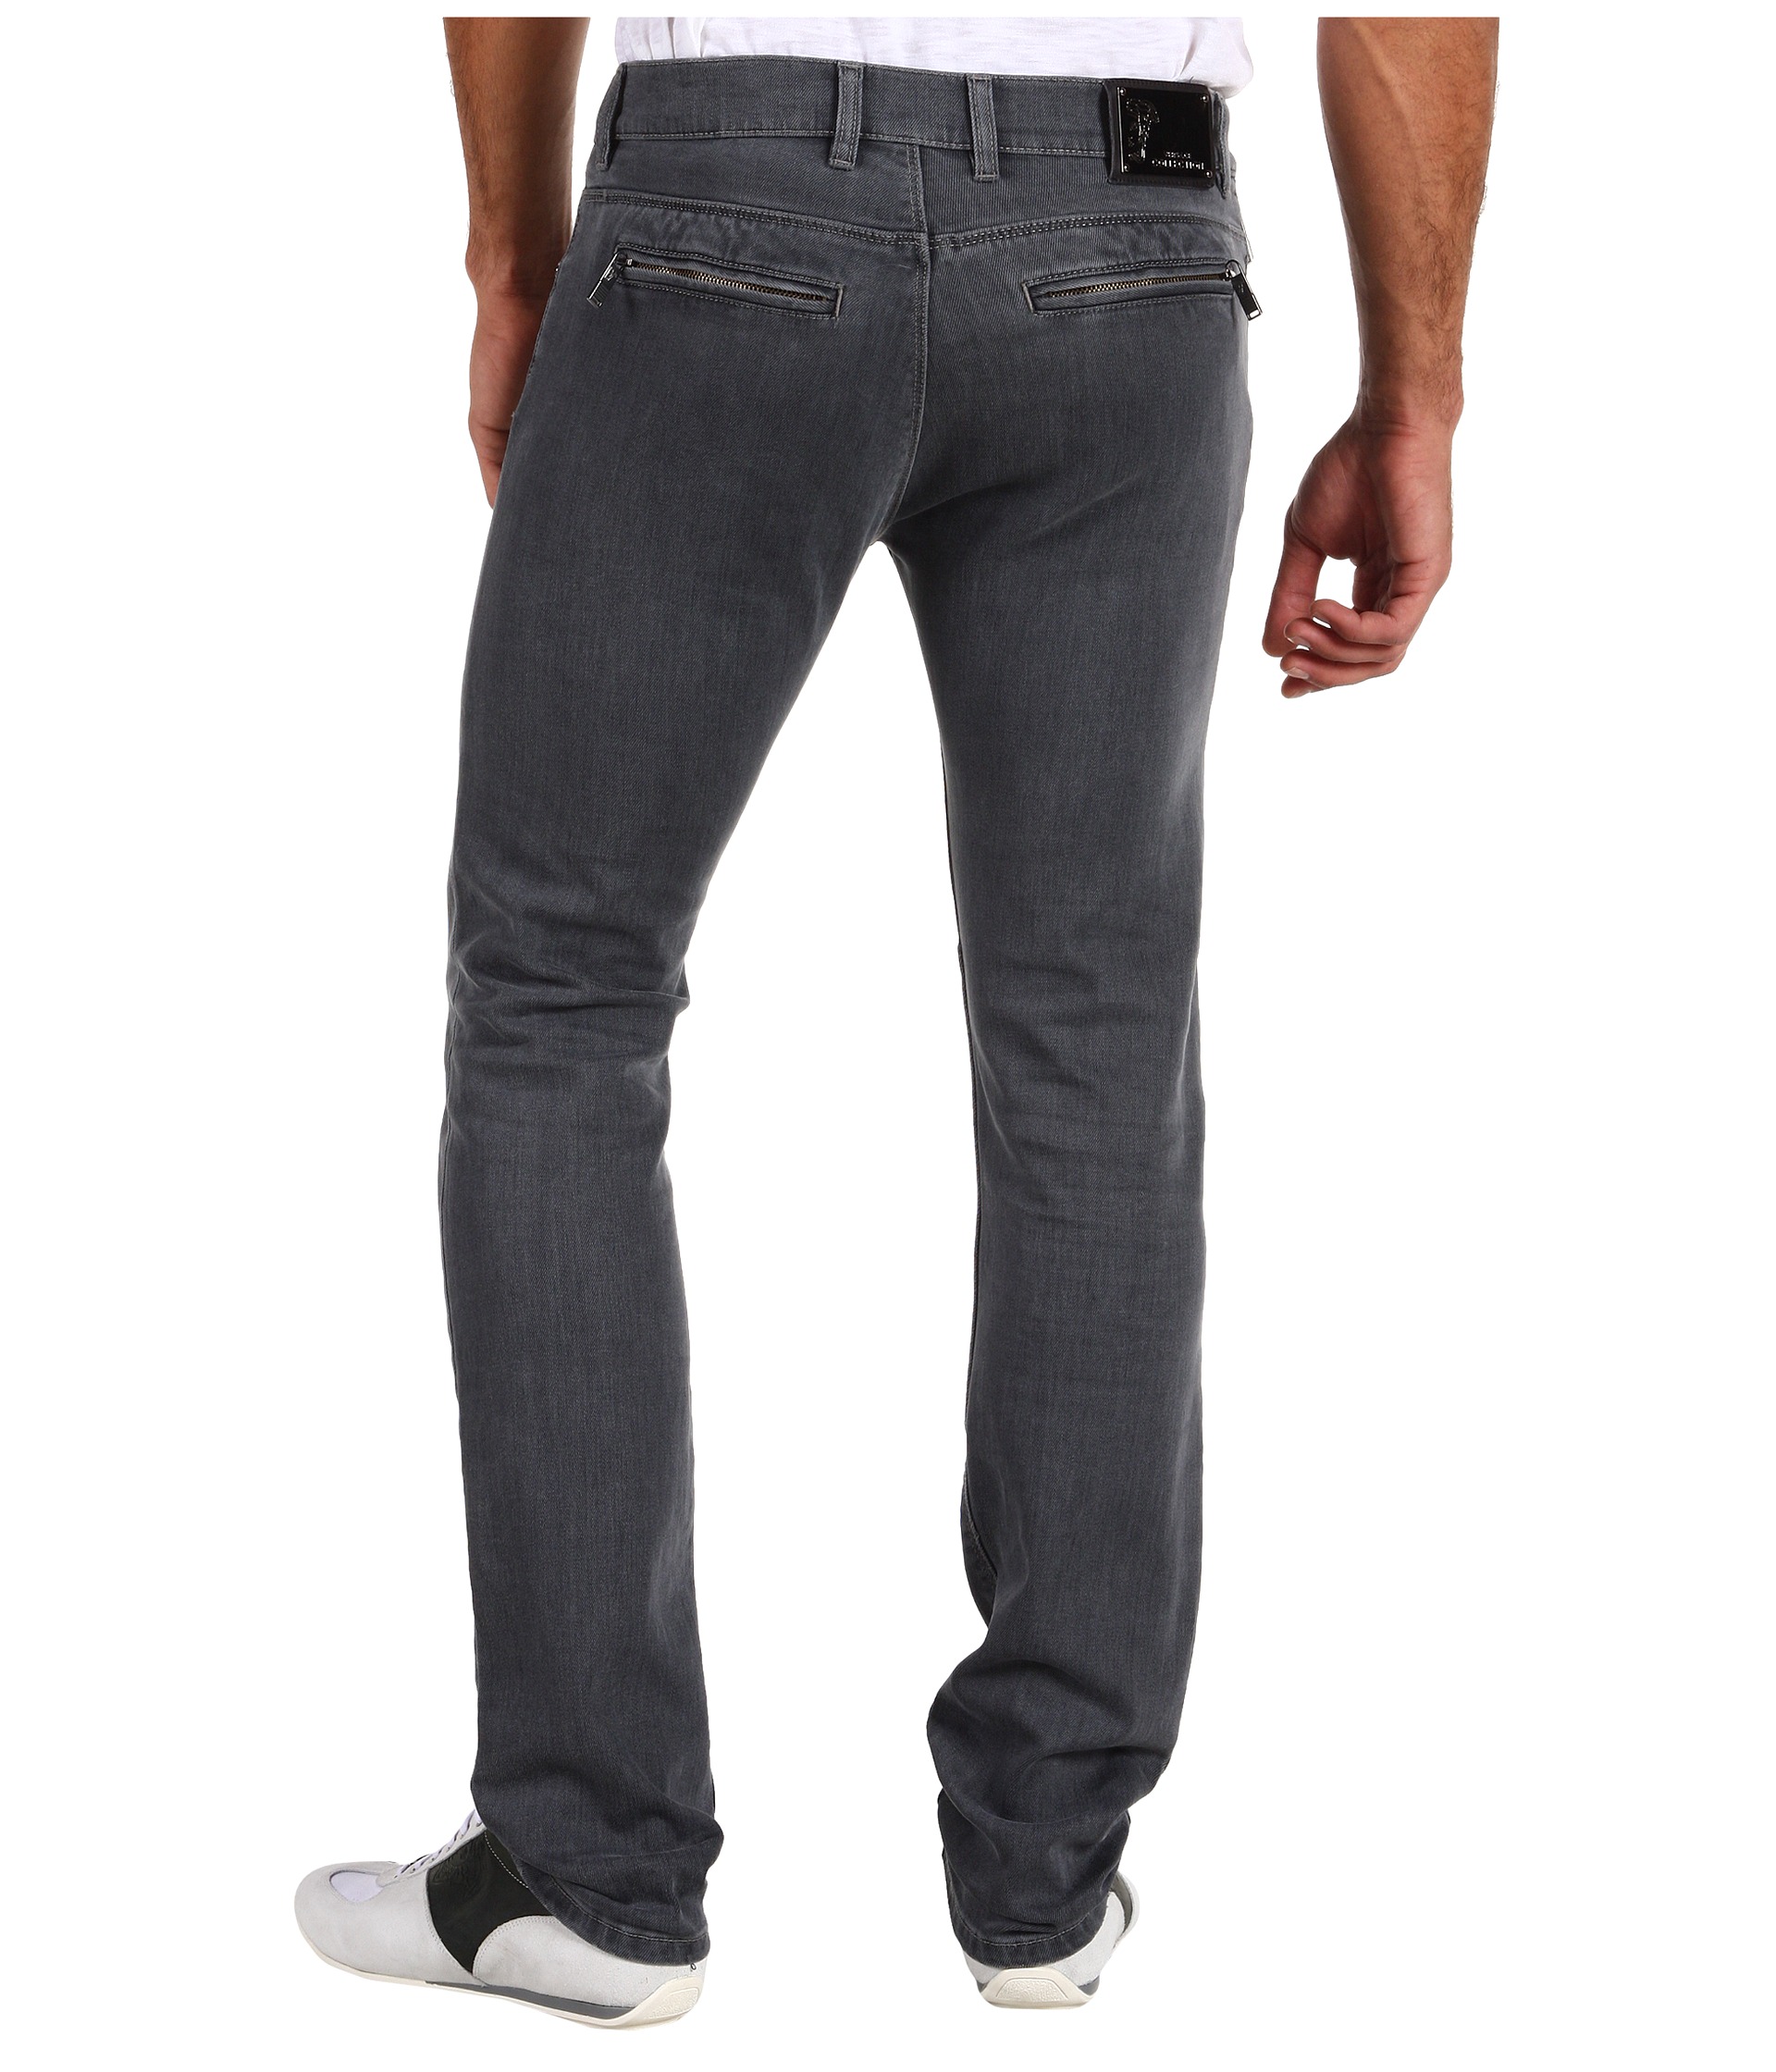 Versace Collection Straight Leg Stretch Jean $204.99 $450.00 SALE